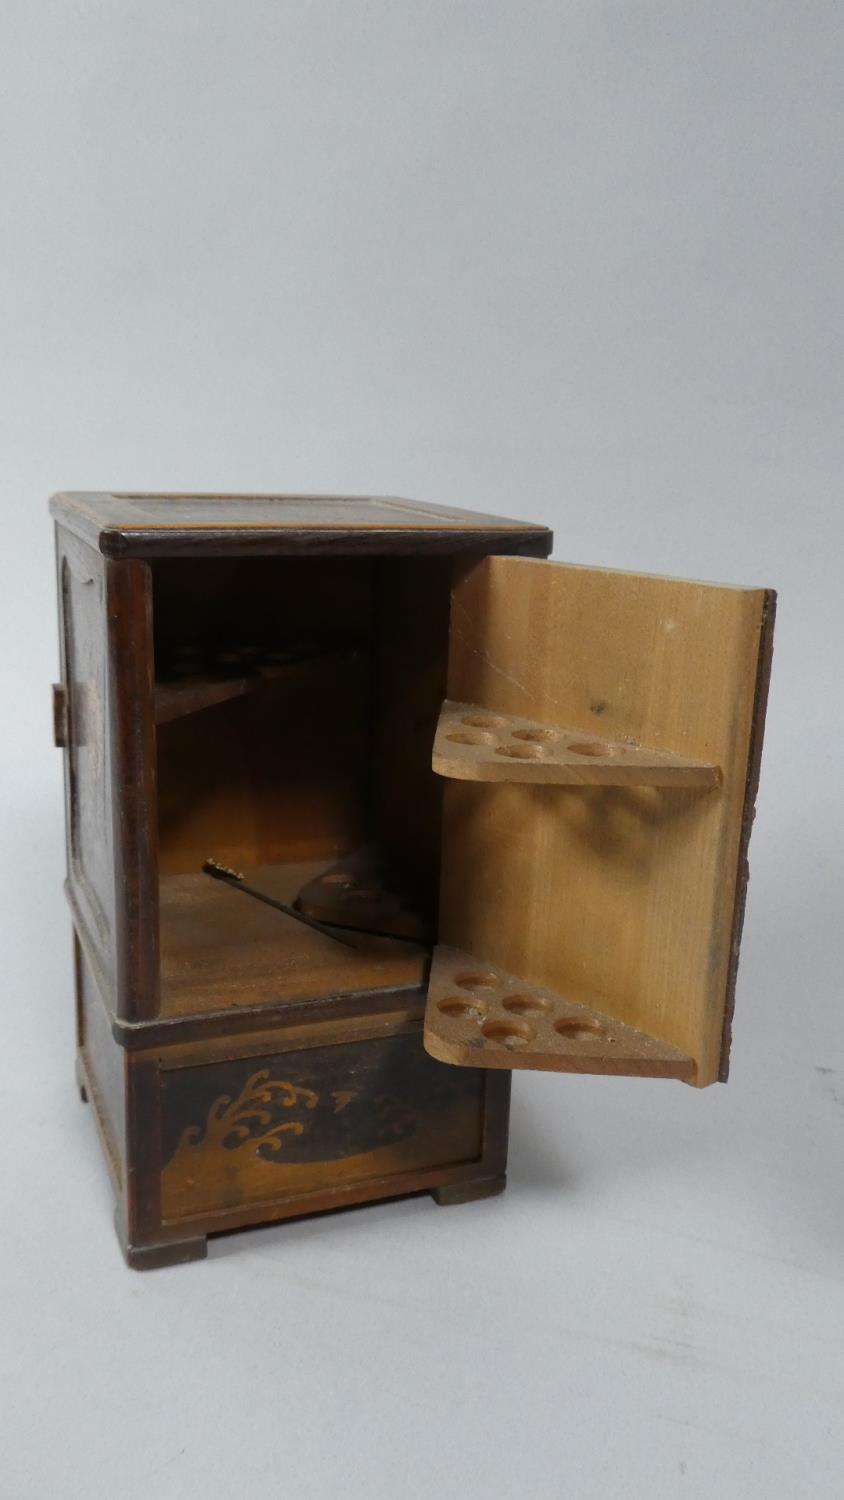 A Miniature Japanese Cigarette Box with Four Hinged Doors and Inlaid Decoration, 16cm High - Image 2 of 4